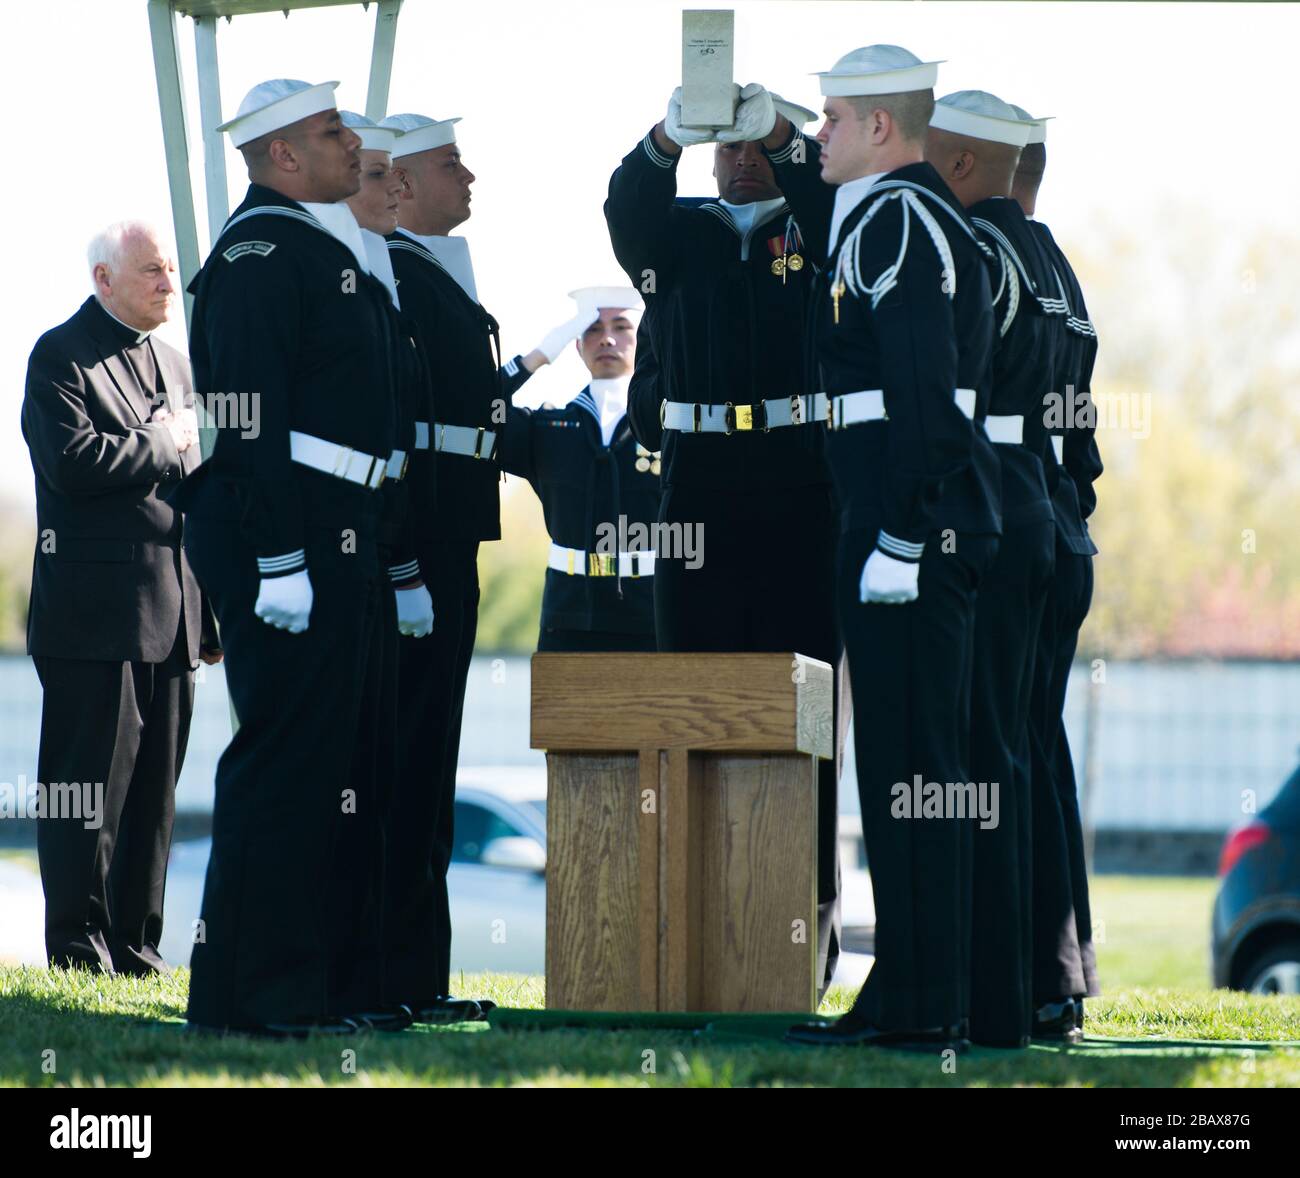 "Sailors participate in the graveside service for U.S. Navy Petty Officer 3rd Class Charles Thomas Dougherty in Arlington National Cemetery, April 18, 2016, in Arlington, Va. Dougherty was inurned in ANC’s Columbarium Court 9. (U.S. Army photo Rachel Larue/Arlington National Cemetery/Rachel Larue); 18 April 2016, 09:10; Graveside Service for U.S. Navy Petty Officer 3rd Class Charles Thomas Dougherty in Arlington National Cemetery; Arlington National Cemetery; " Stock Photo